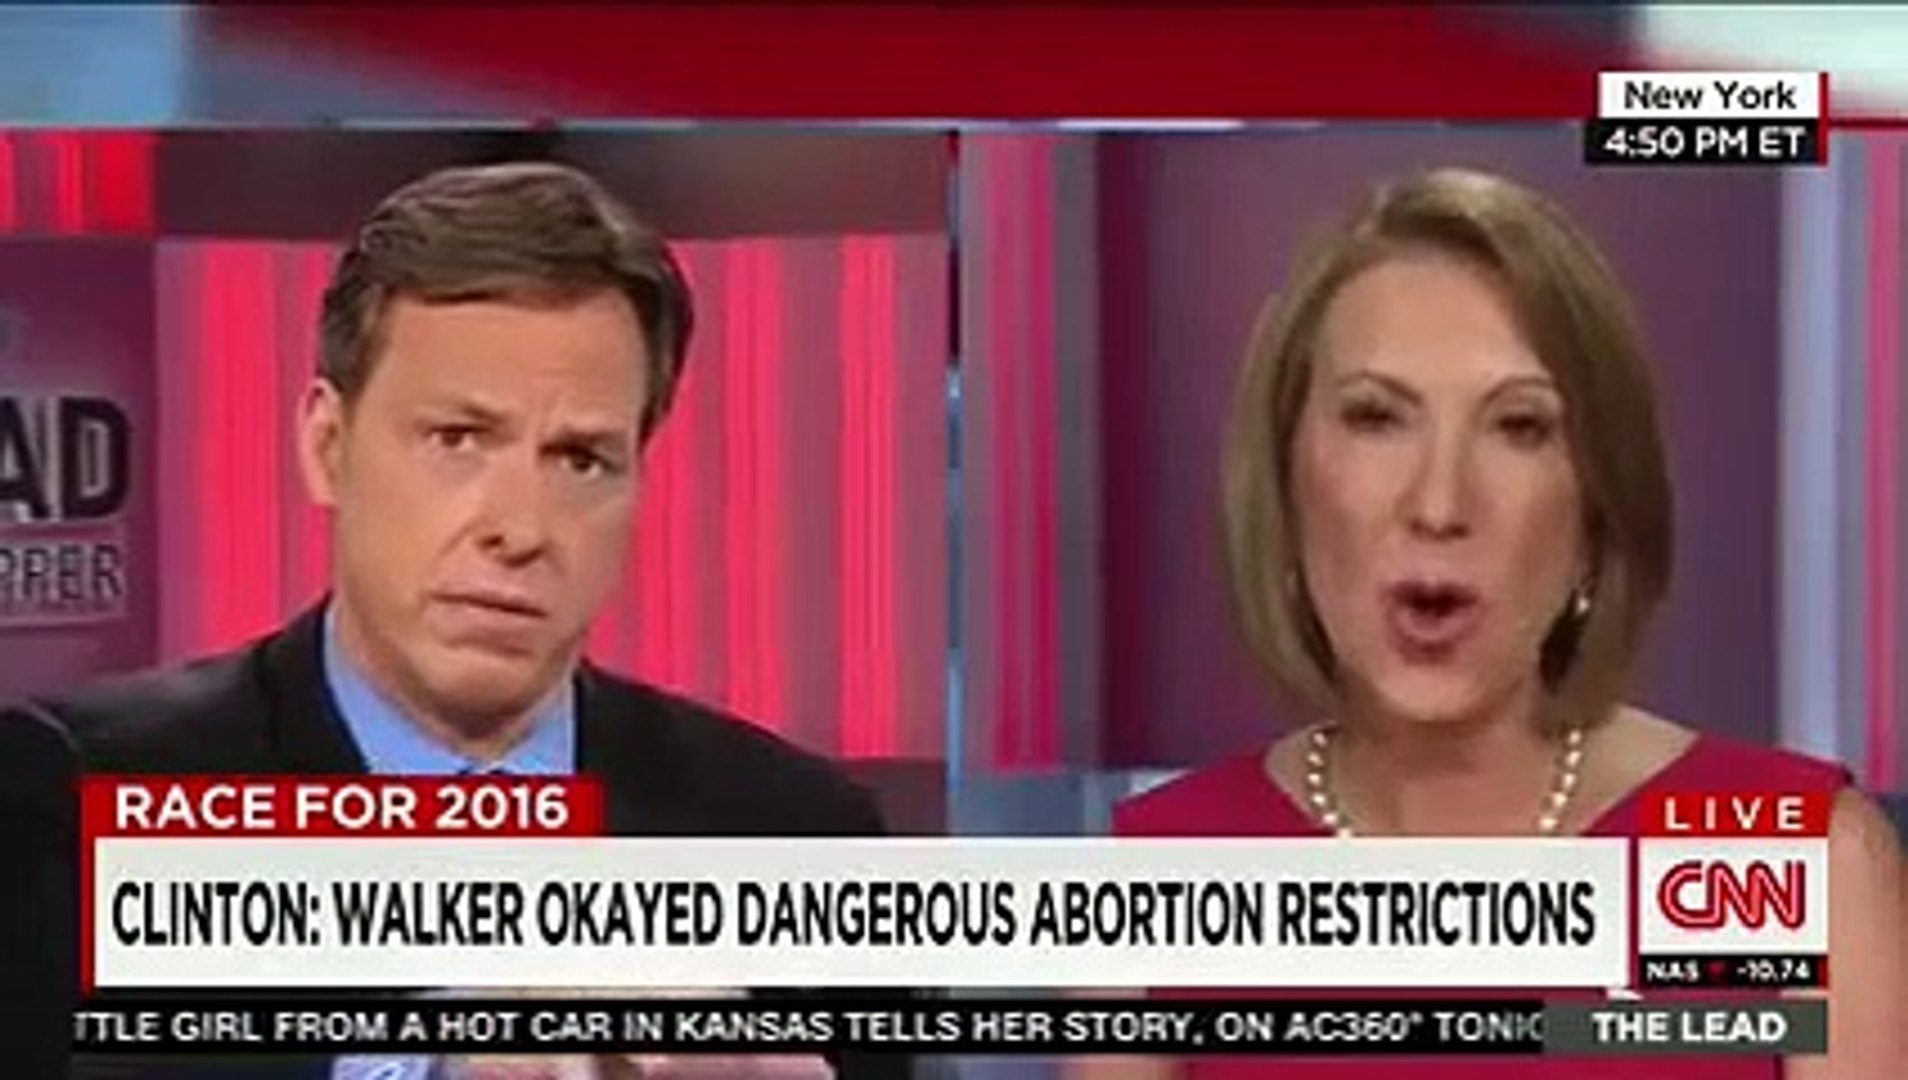 Carly discusses the latest despicable news about Planned Parenthood